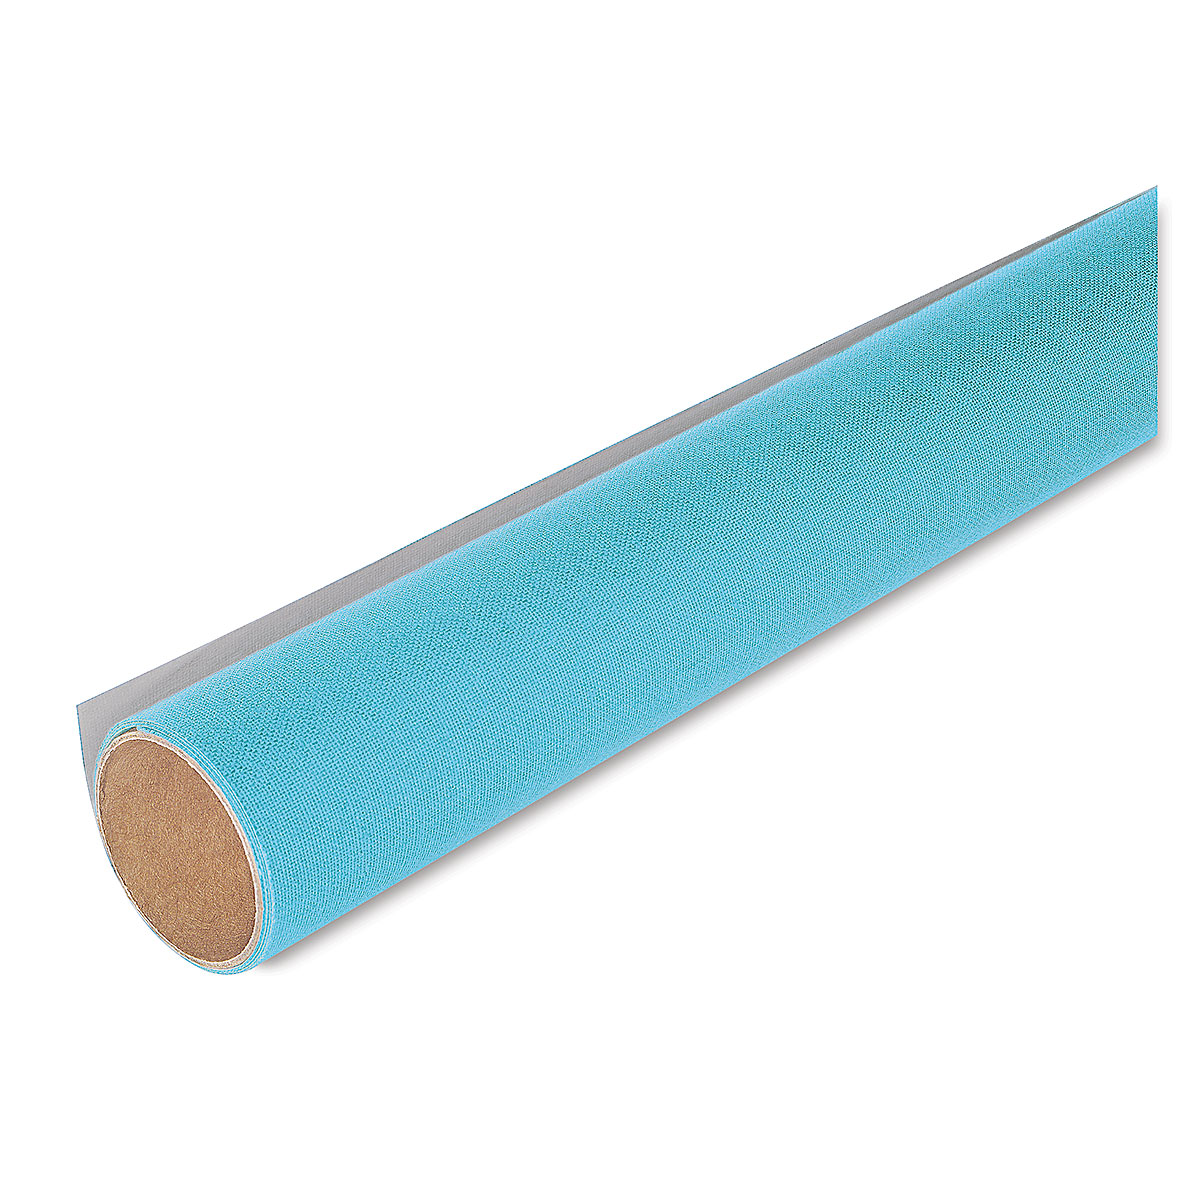 Lineco Book Cloth - 17 x 19, Teal, Rolled Sheet